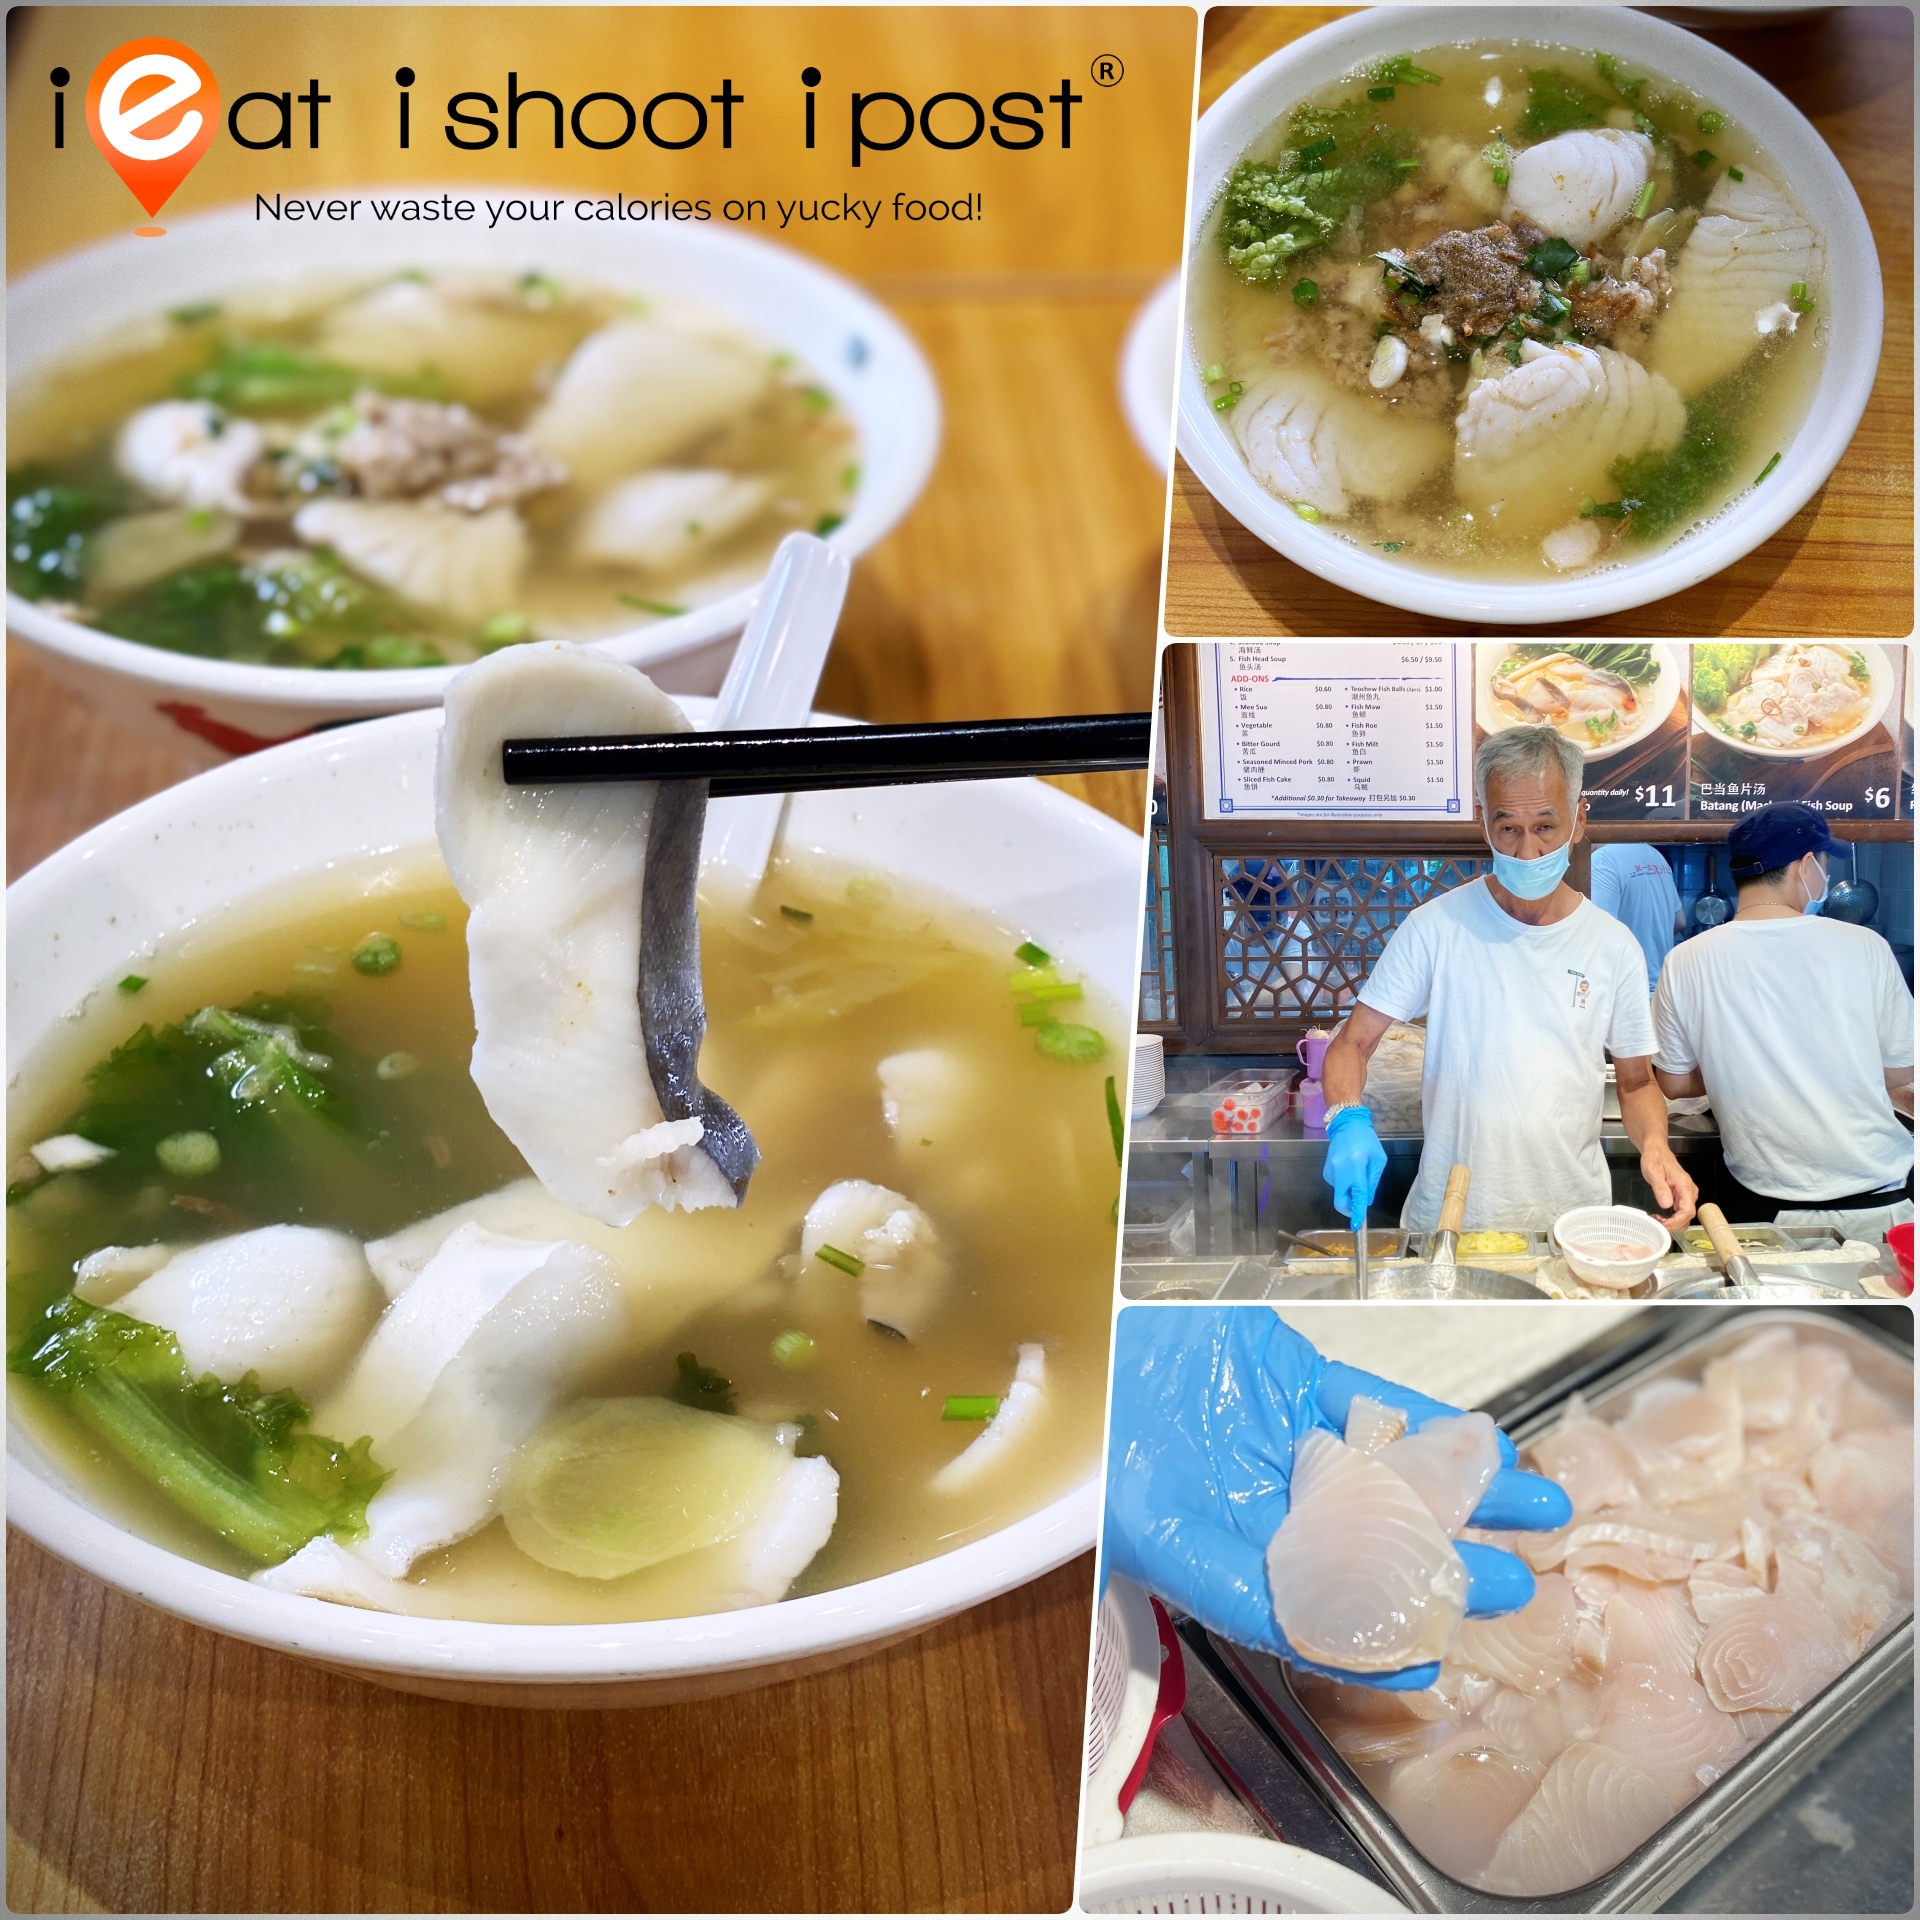 Pomfret Fish Soup, Batang Fish Soup with Minced Meat topping, Mr William Lim, co-founder, fresh slices for Pompret